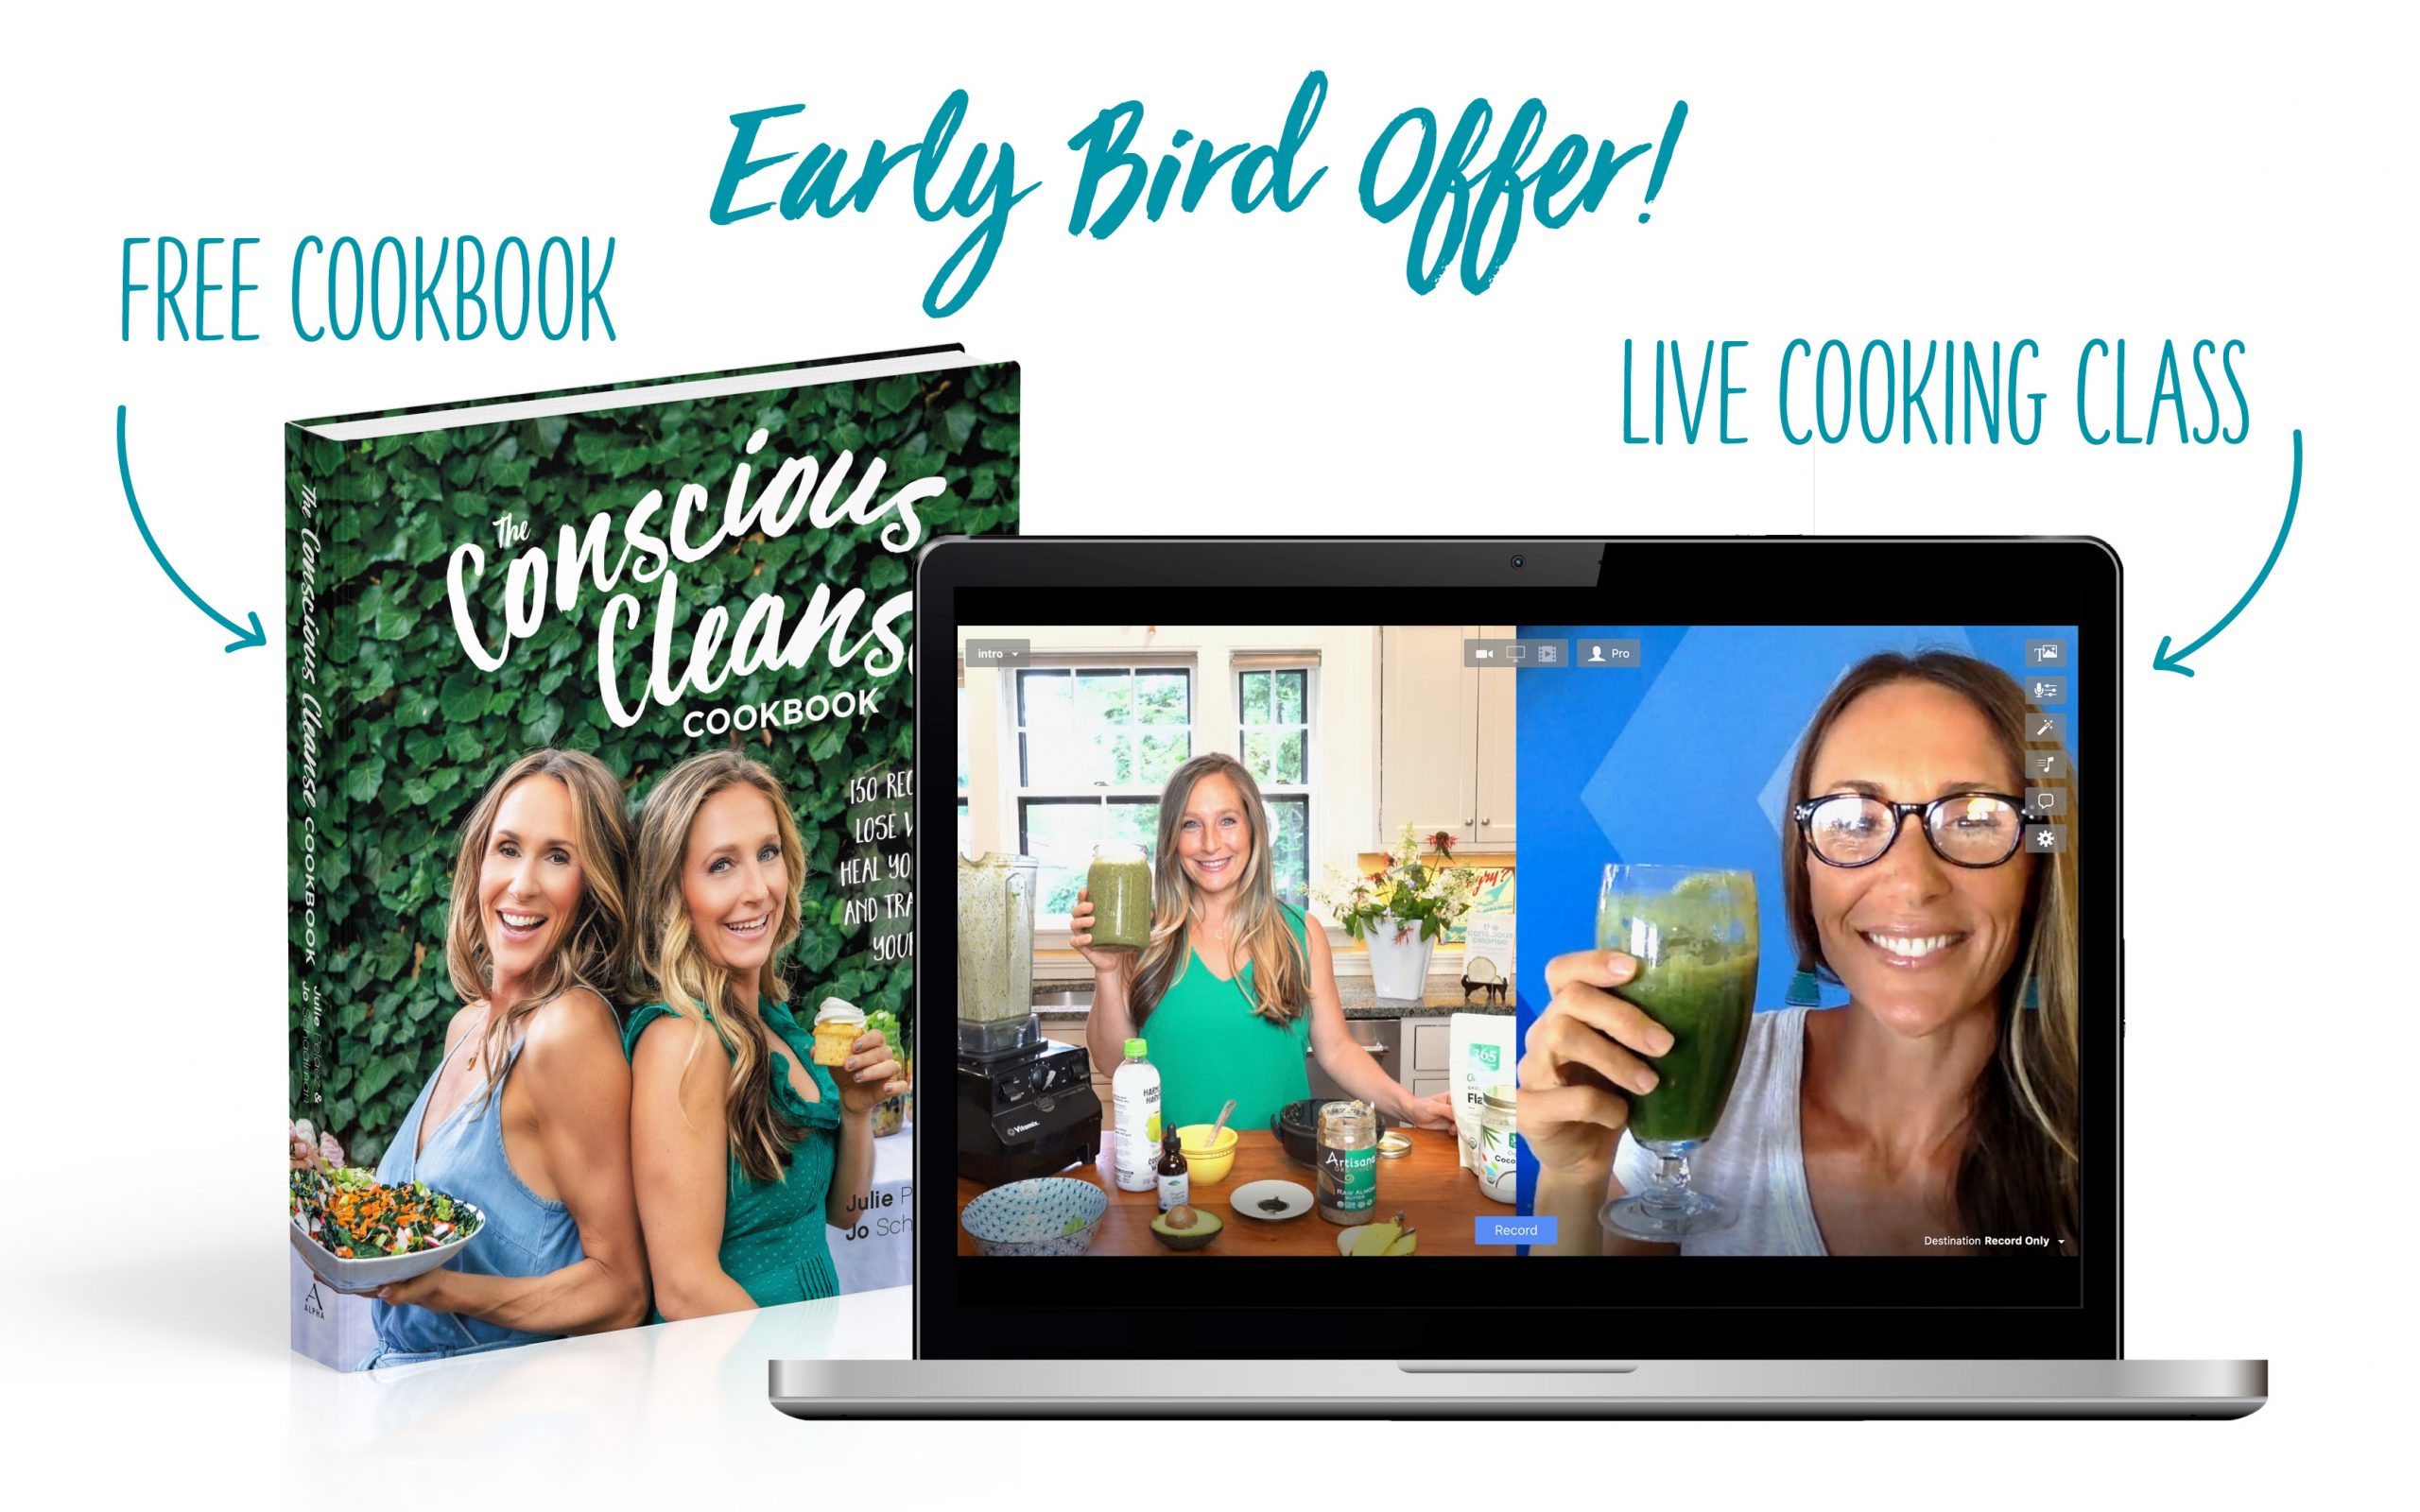 Join our Jan. Cleanse and get a FREE Cooking Class + Cookbook!